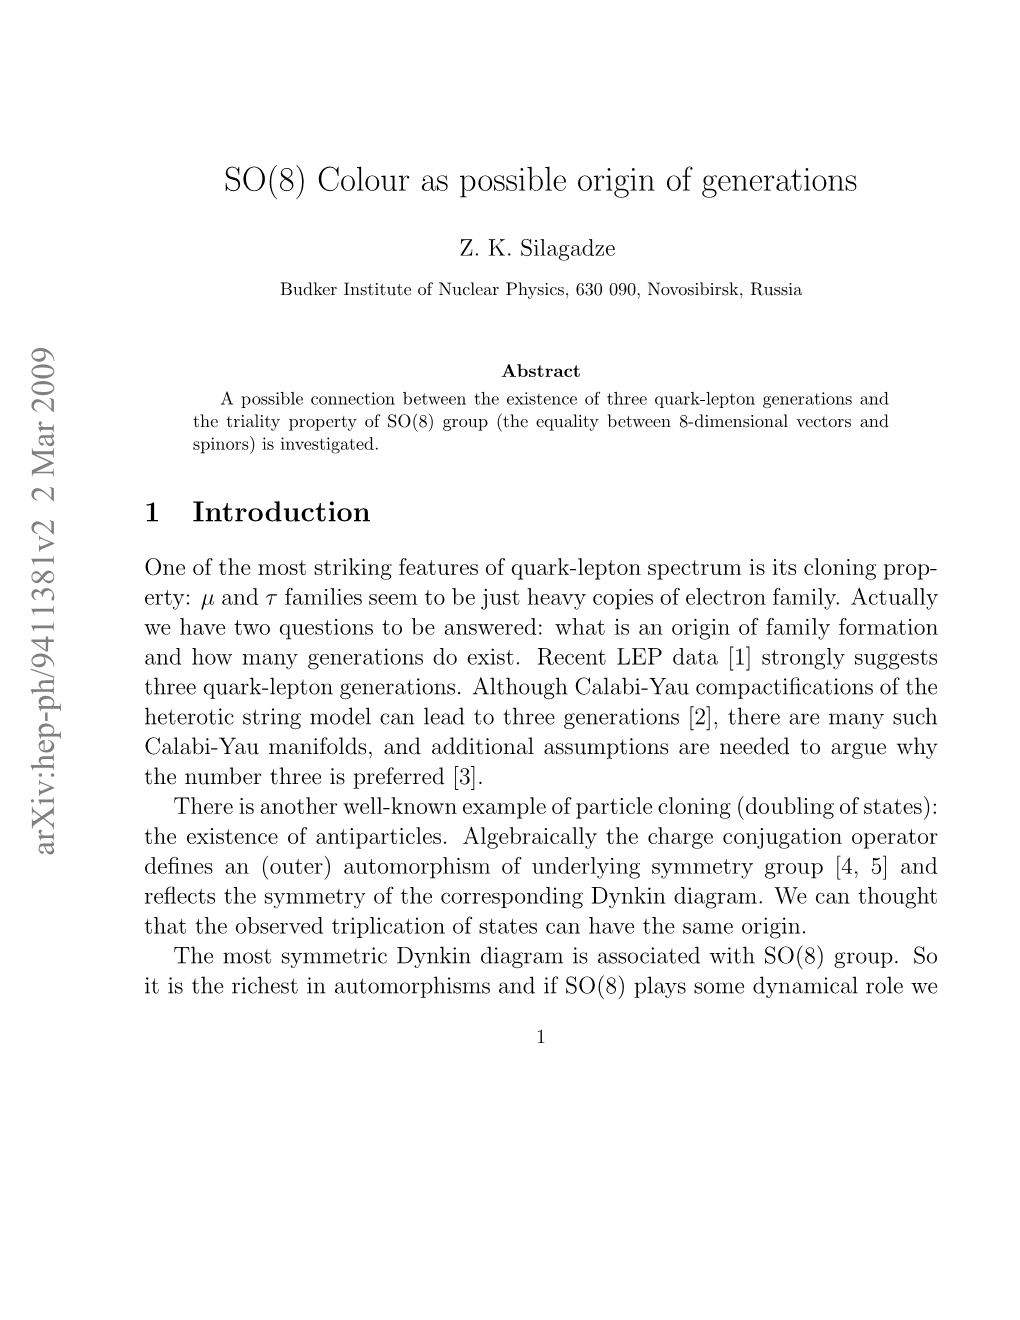 SO (8) Colour As Possible Origin of Generations